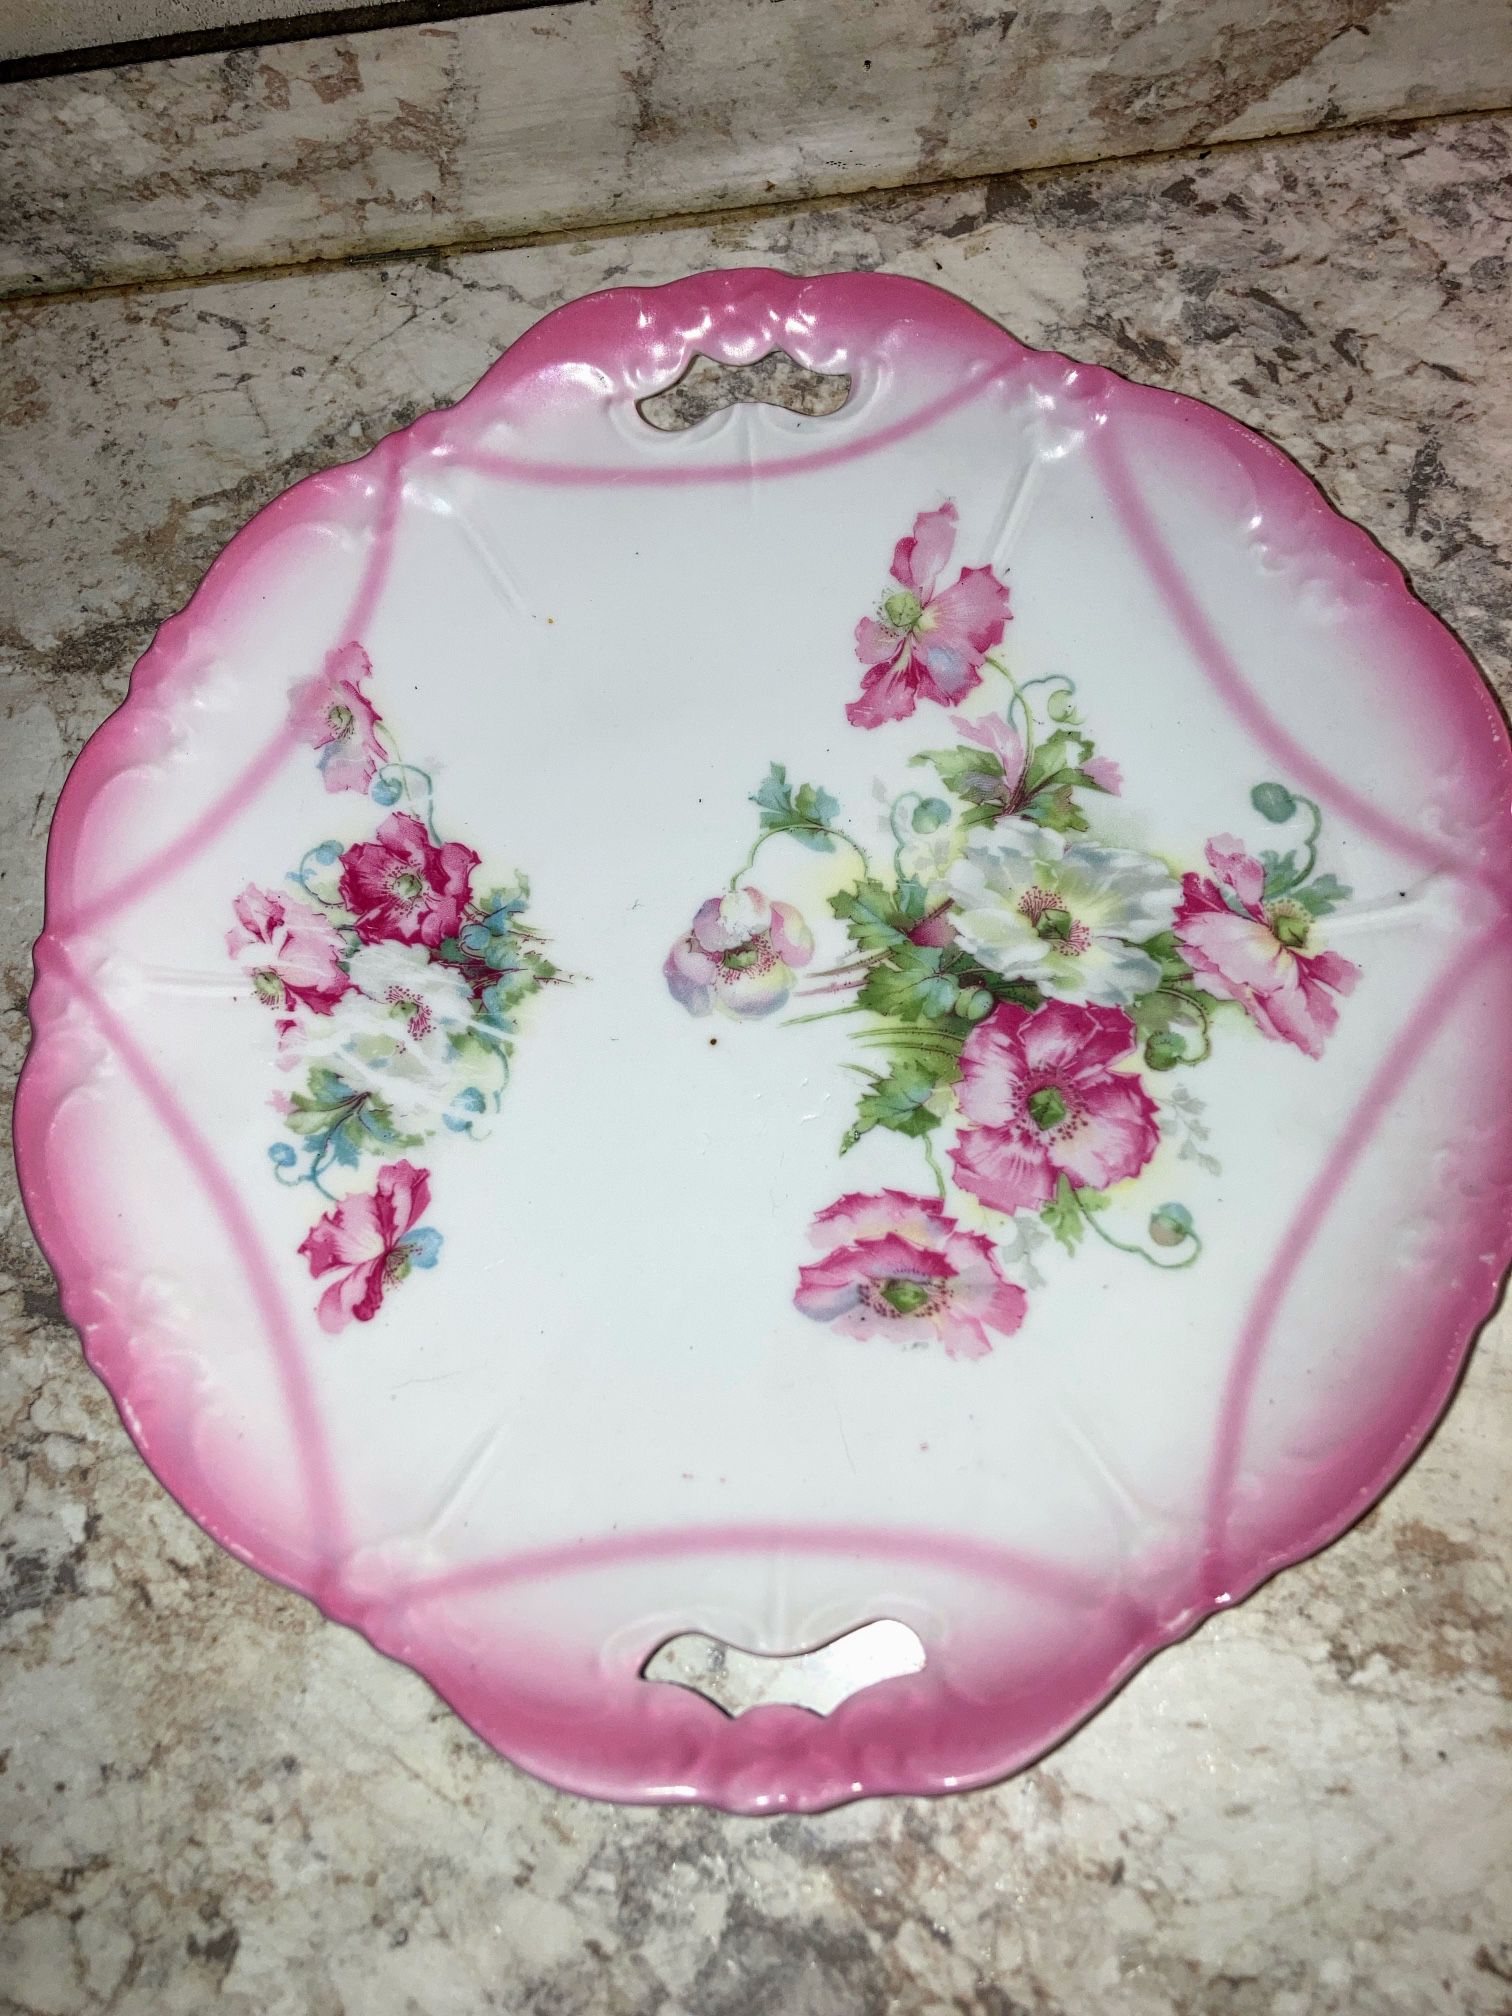 Antquie Germany Made Porcelain Two Handled Cake Or Dessert Plate 